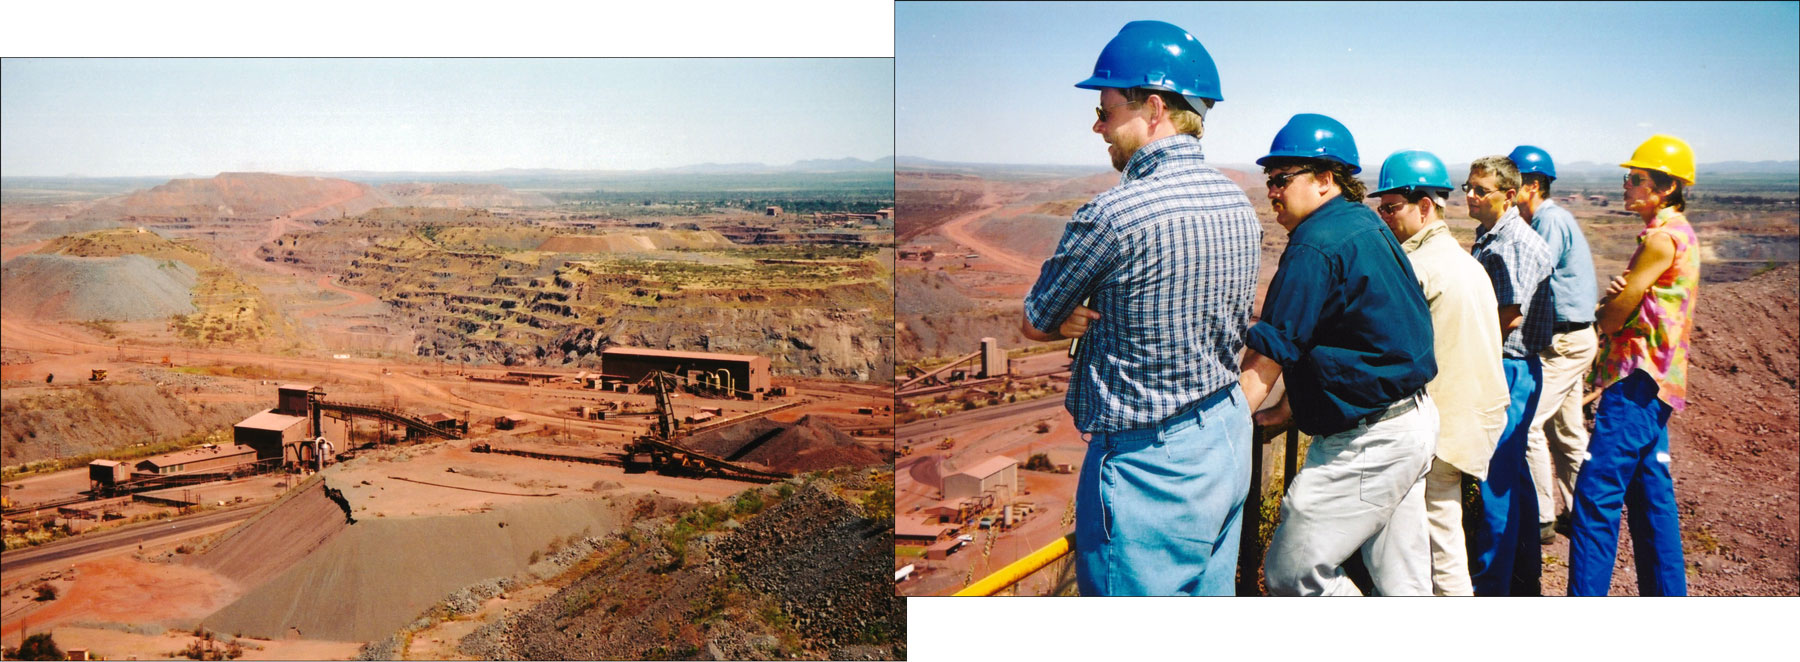 Overlooking the Sishen pit and facilities